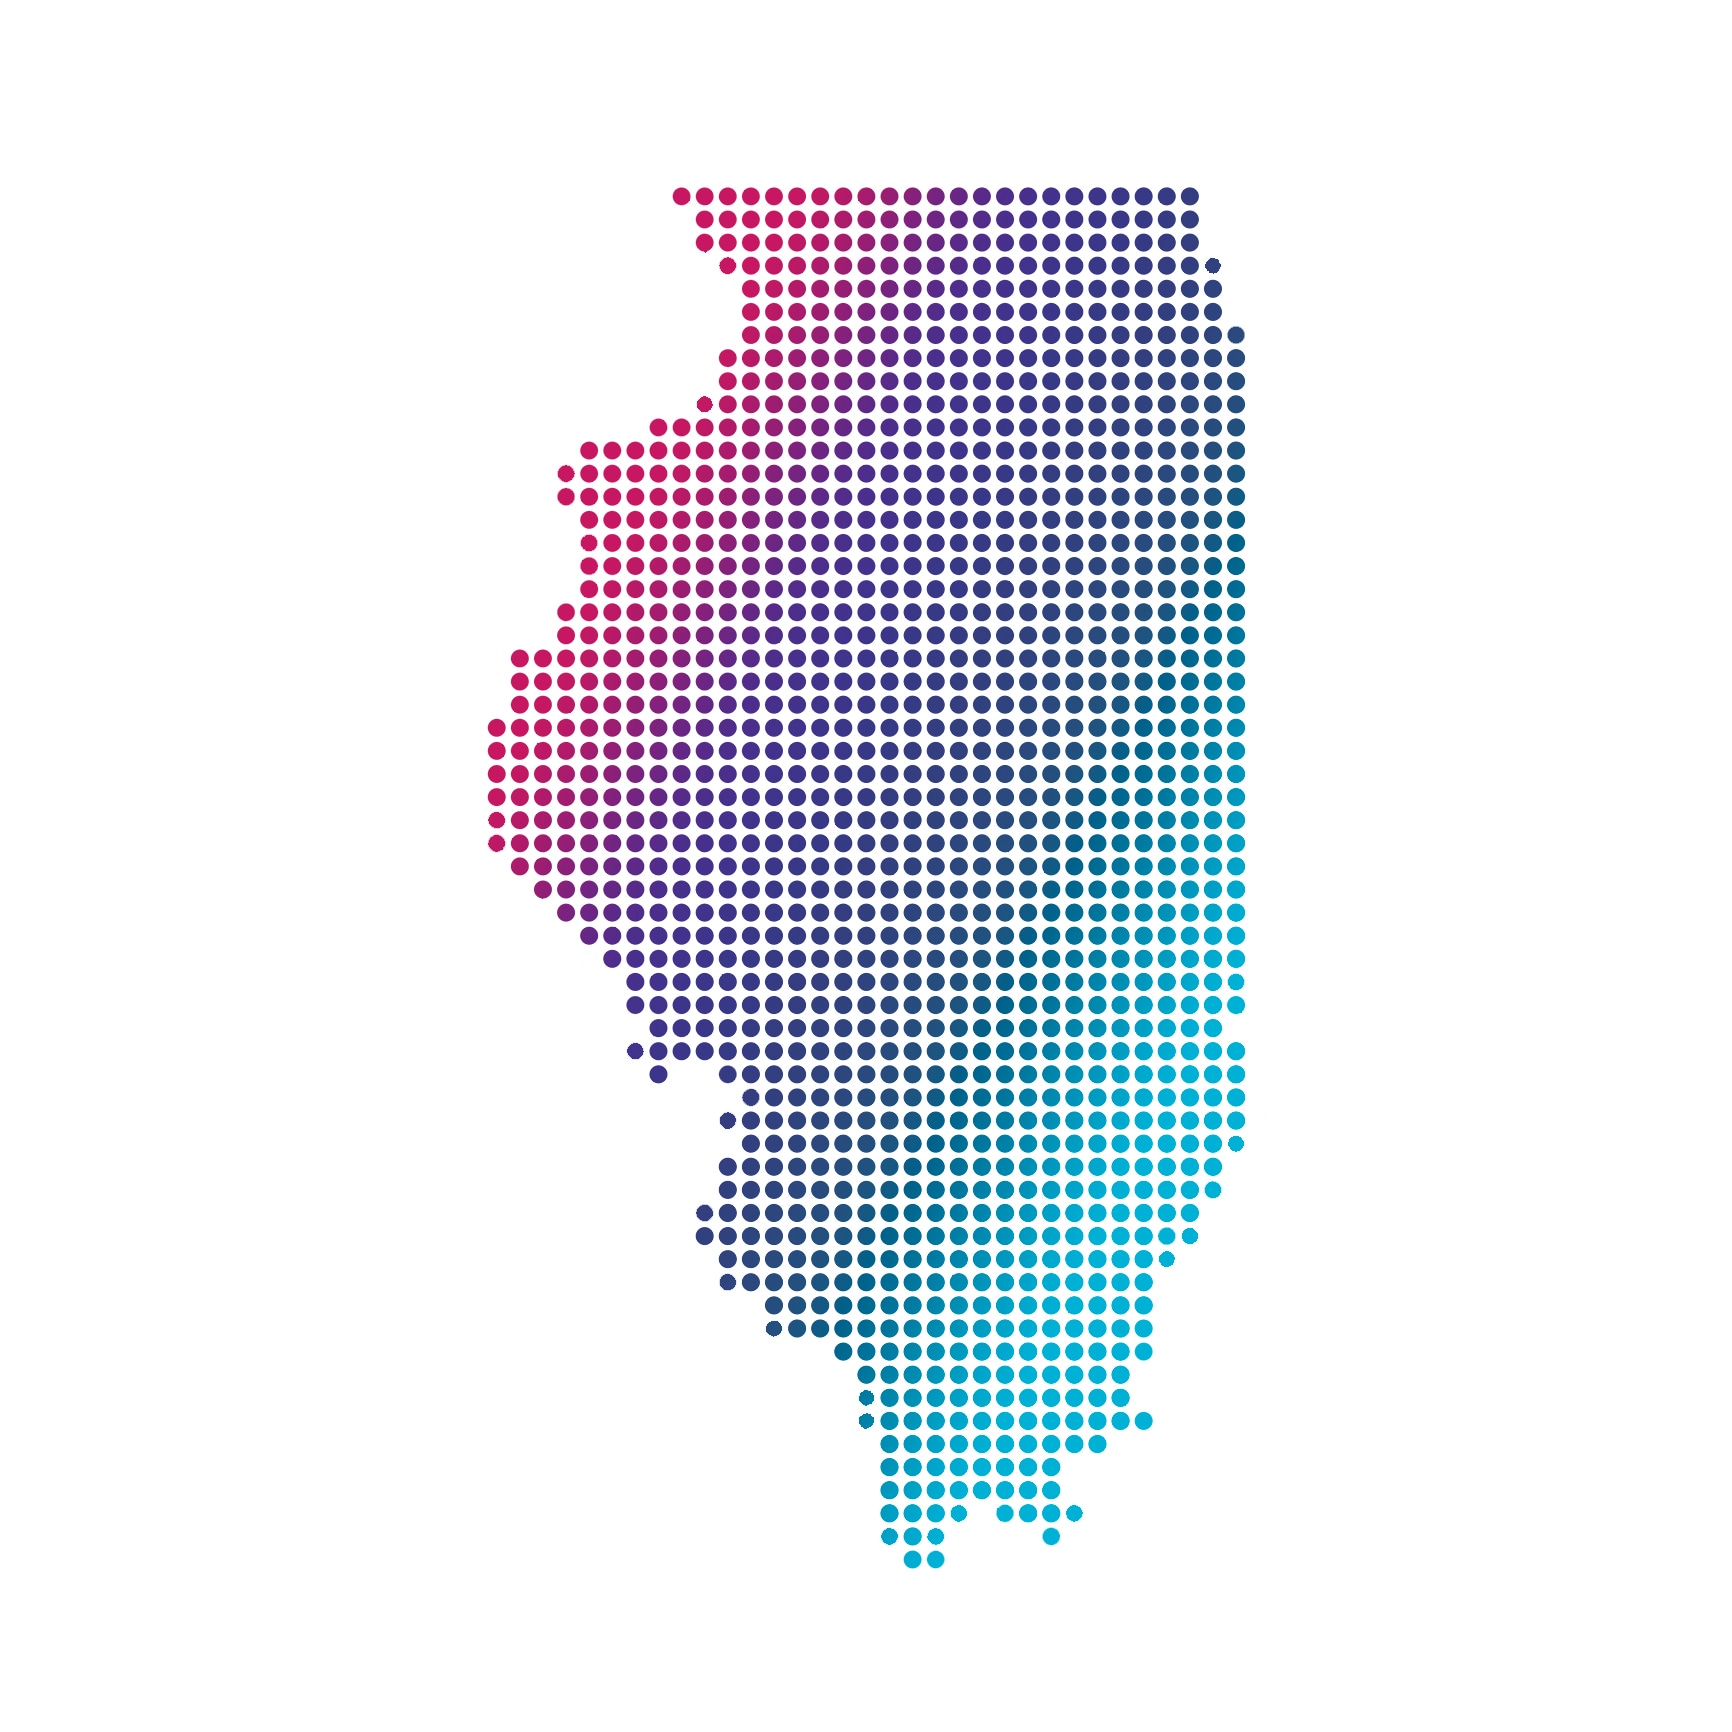 Illinois map of blue dots on white background